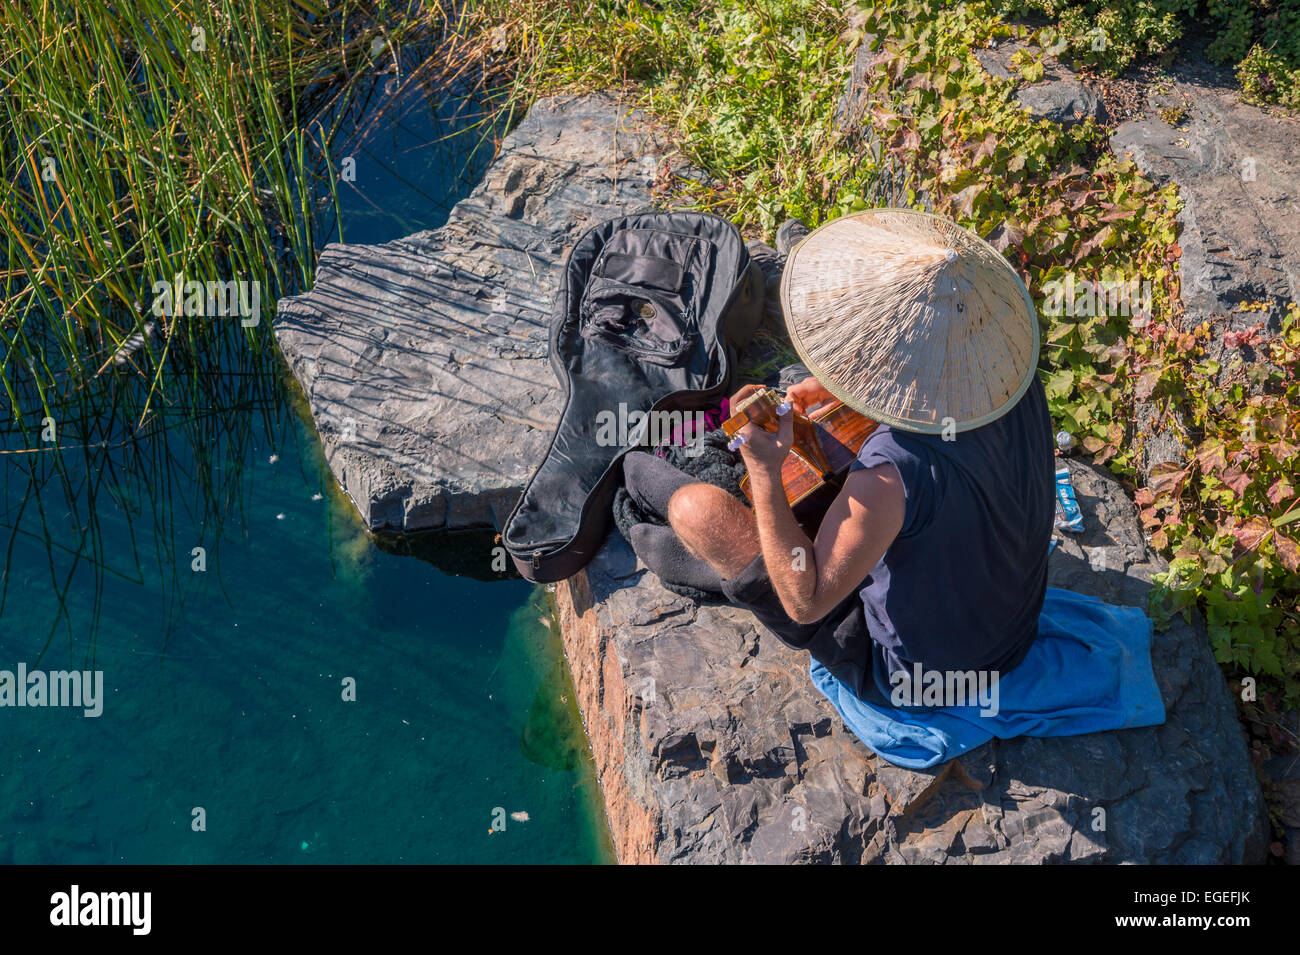 Man with Bamboo hat playing guitar on a rock at Lafontaine Park in Montreal, during the Indian Summer Stock Photo